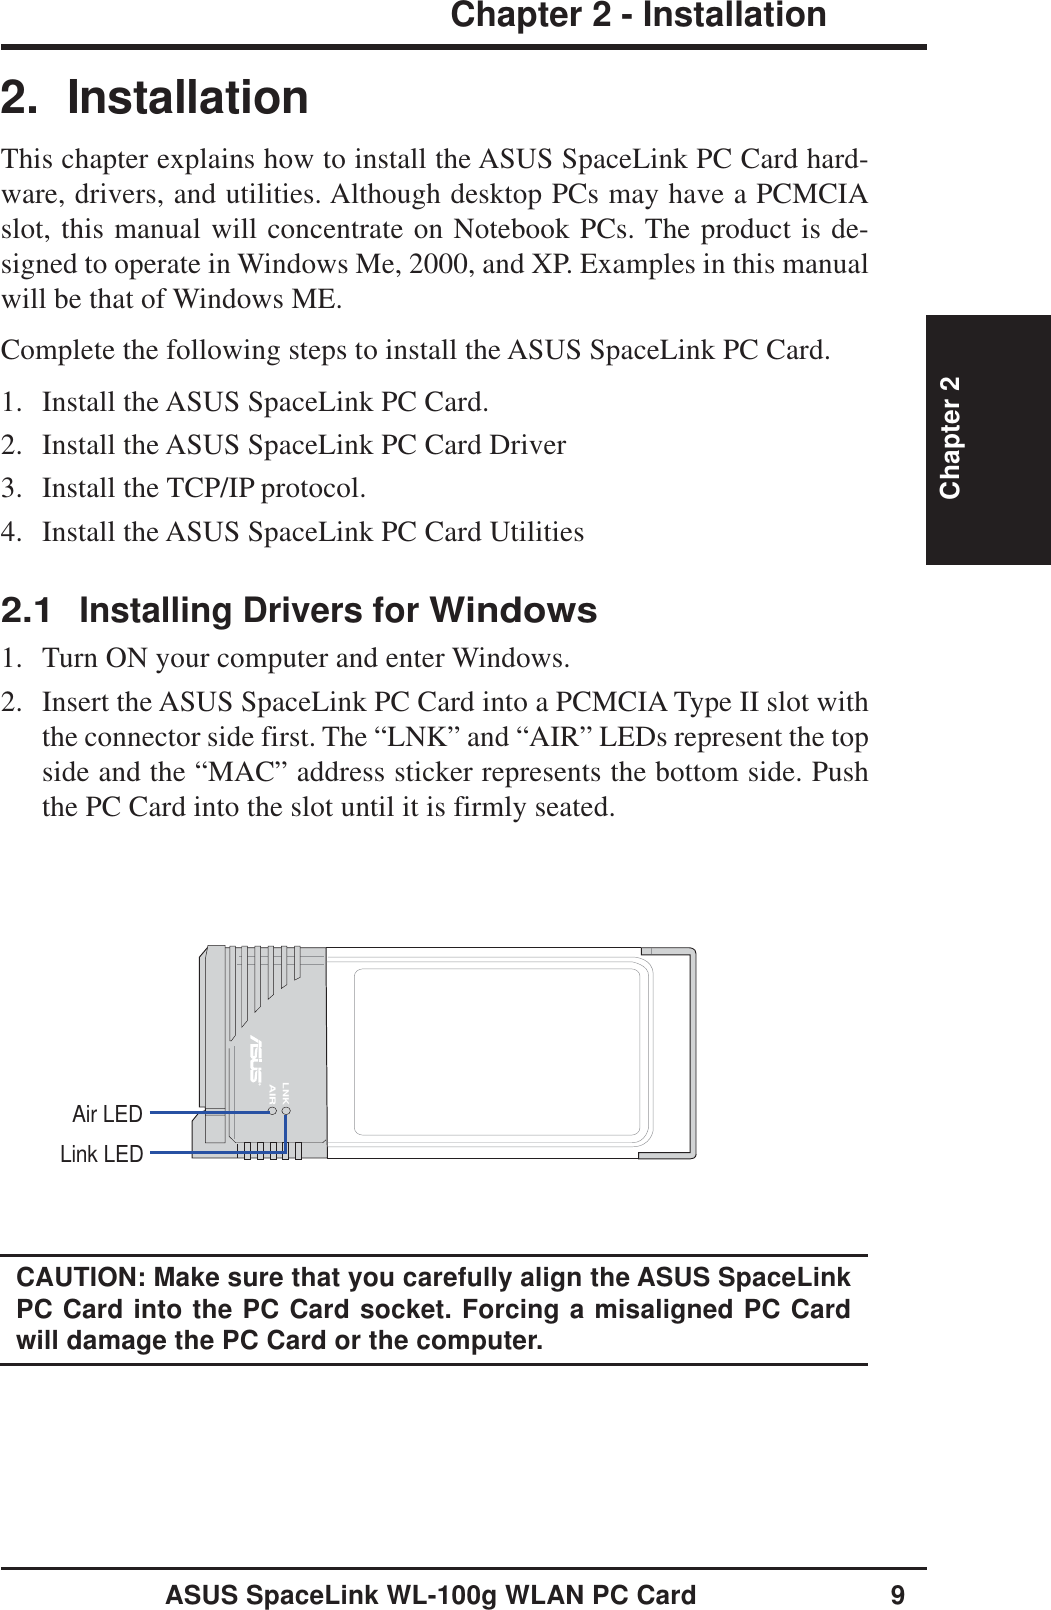 ASUS SpaceLink WL-100g WLAN PC Card 9Chapter 2 - InstallationChapter 22. InstallationThis chapter explains how to install the ASUS SpaceLink PC Card hard-ware, drivers, and utilities. Although desktop PCs may have a PCMCIAslot, this manual will concentrate on Notebook PCs. The product is de-signed to operate in Windows Me, 2000, and XP. Examples in this manualwill be that of Windows ME.Complete the following steps to install the ASUS SpaceLink PC Card.1. Install the ASUS SpaceLink PC Card.2. Install the ASUS SpaceLink PC Card Driver3. Install the TCP/IP protocol.4. Install the ASUS SpaceLink PC Card Utilities2.1Installing Drivers for Windows1. Turn ON your computer and enter Windows.2. Insert the ASUS SpaceLink PC Card into a PCMCIA Type II slot withthe connector side first. The “LNK” and “AIR” LEDs represent the topside and the “MAC” address sticker represents the bottom side. Pushthe PC Card into the slot until it is firmly seated.LNKAIRAir LEDLink LEDCAUTION: Make sure that you carefully align the ASUS SpaceLinkPC Card into the PC Card socket. Forcing a misaligned PC Cardwill damage the PC Card or the computer.